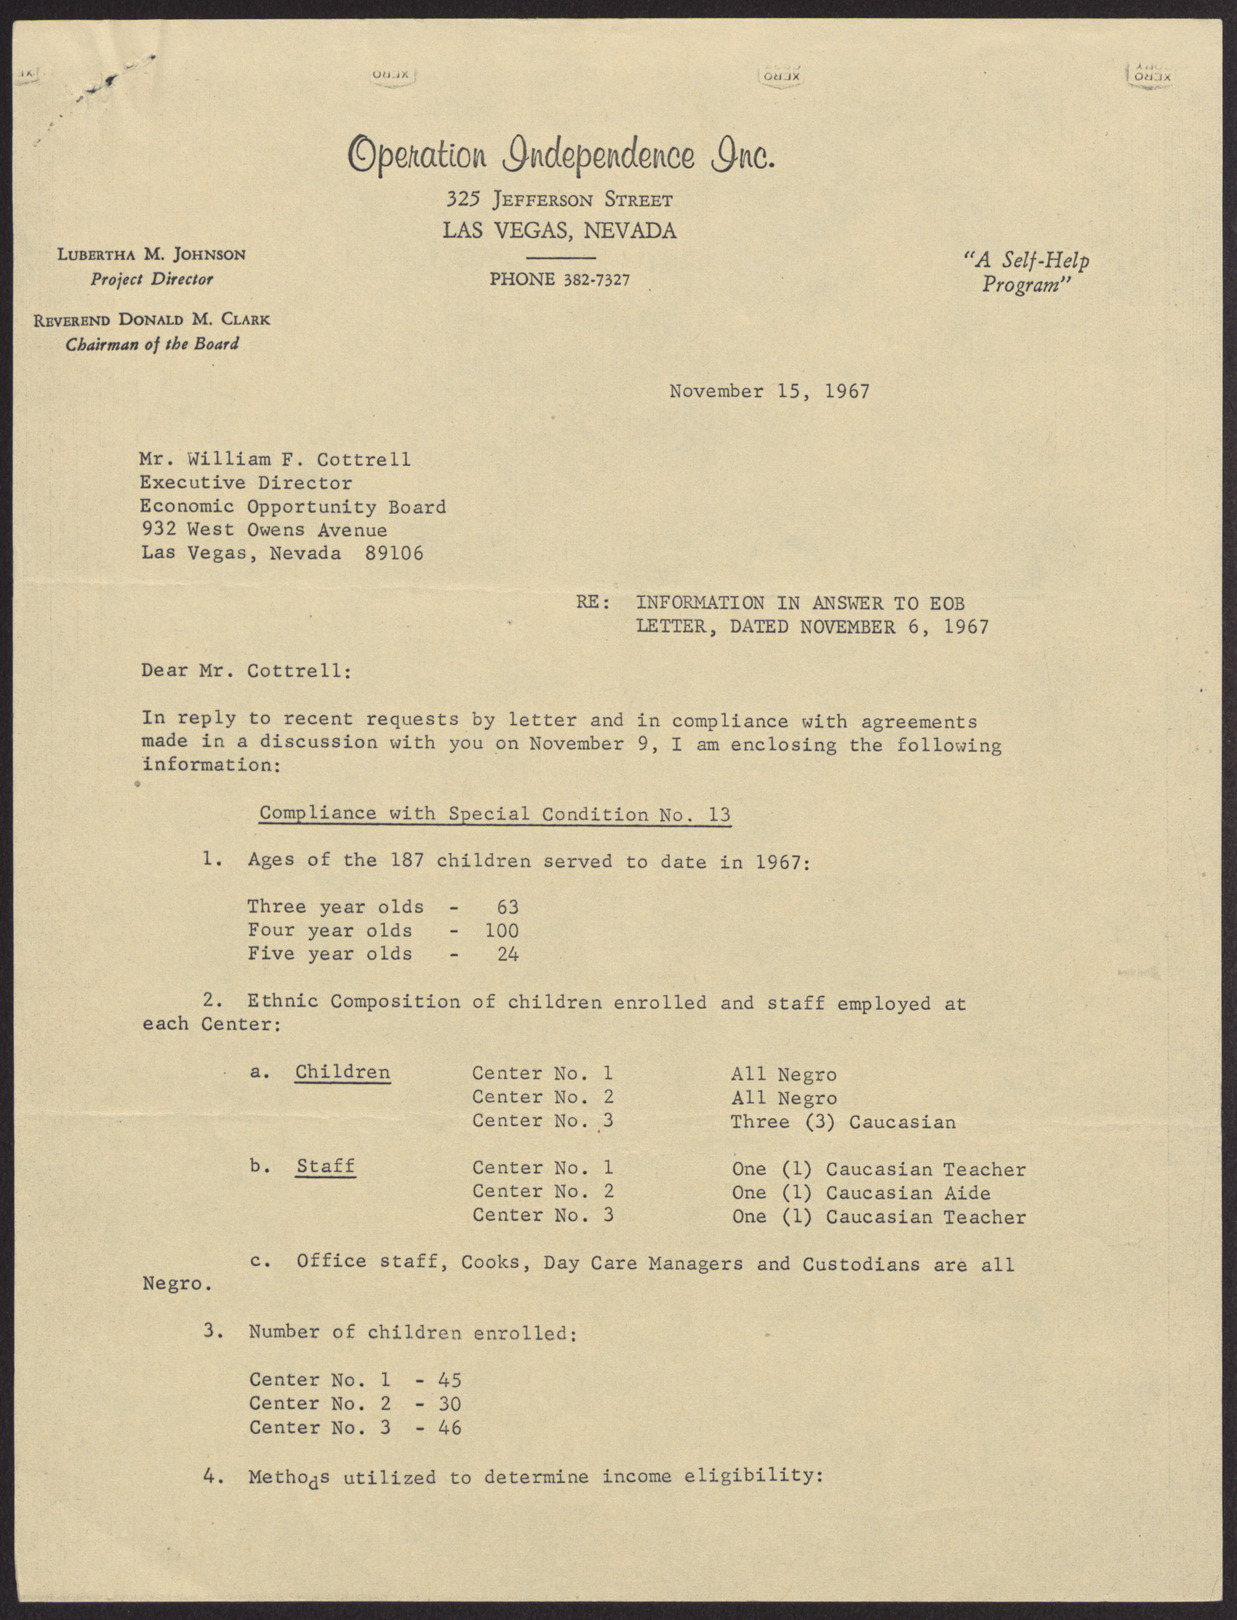 Letter to Mr. William F. Cottrell from Lubertha M. Johnson (2 pages), November 15, 1967